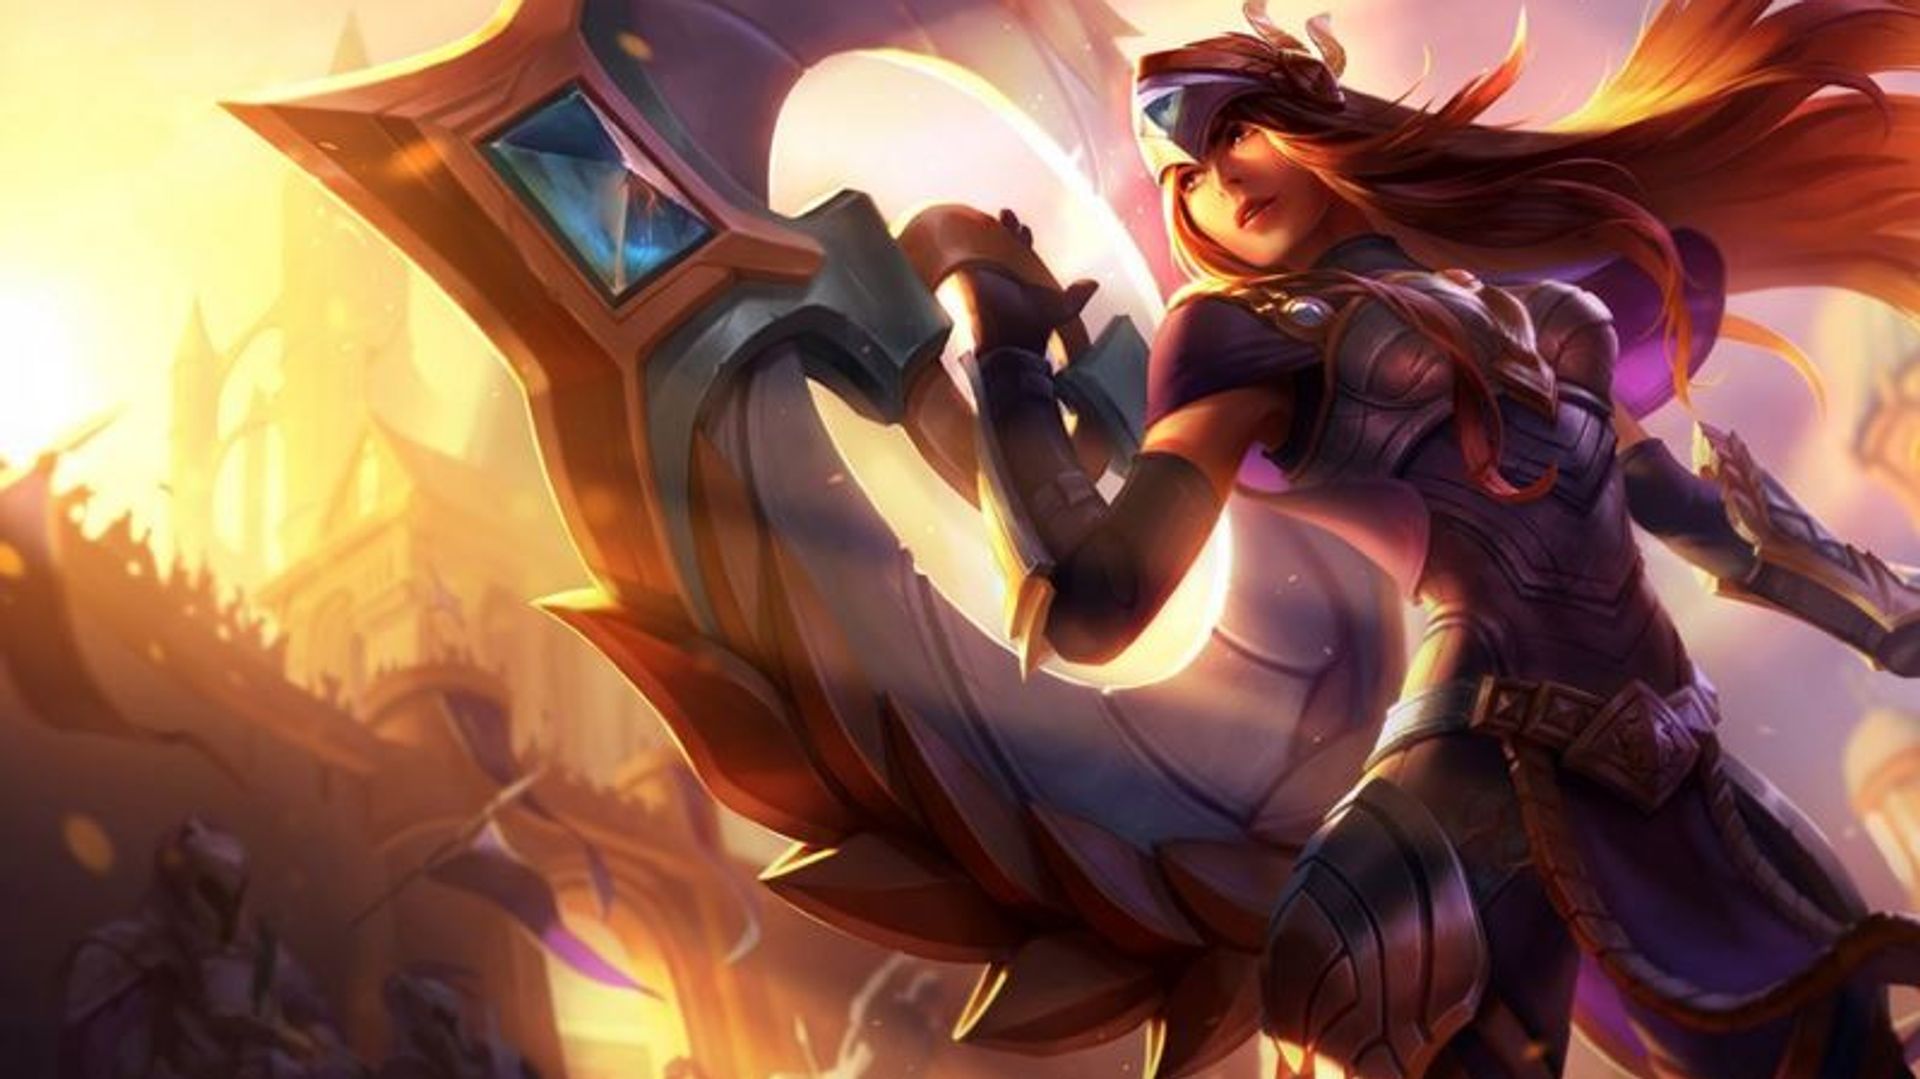 How League of Legends Ranked System Works — The Climb to